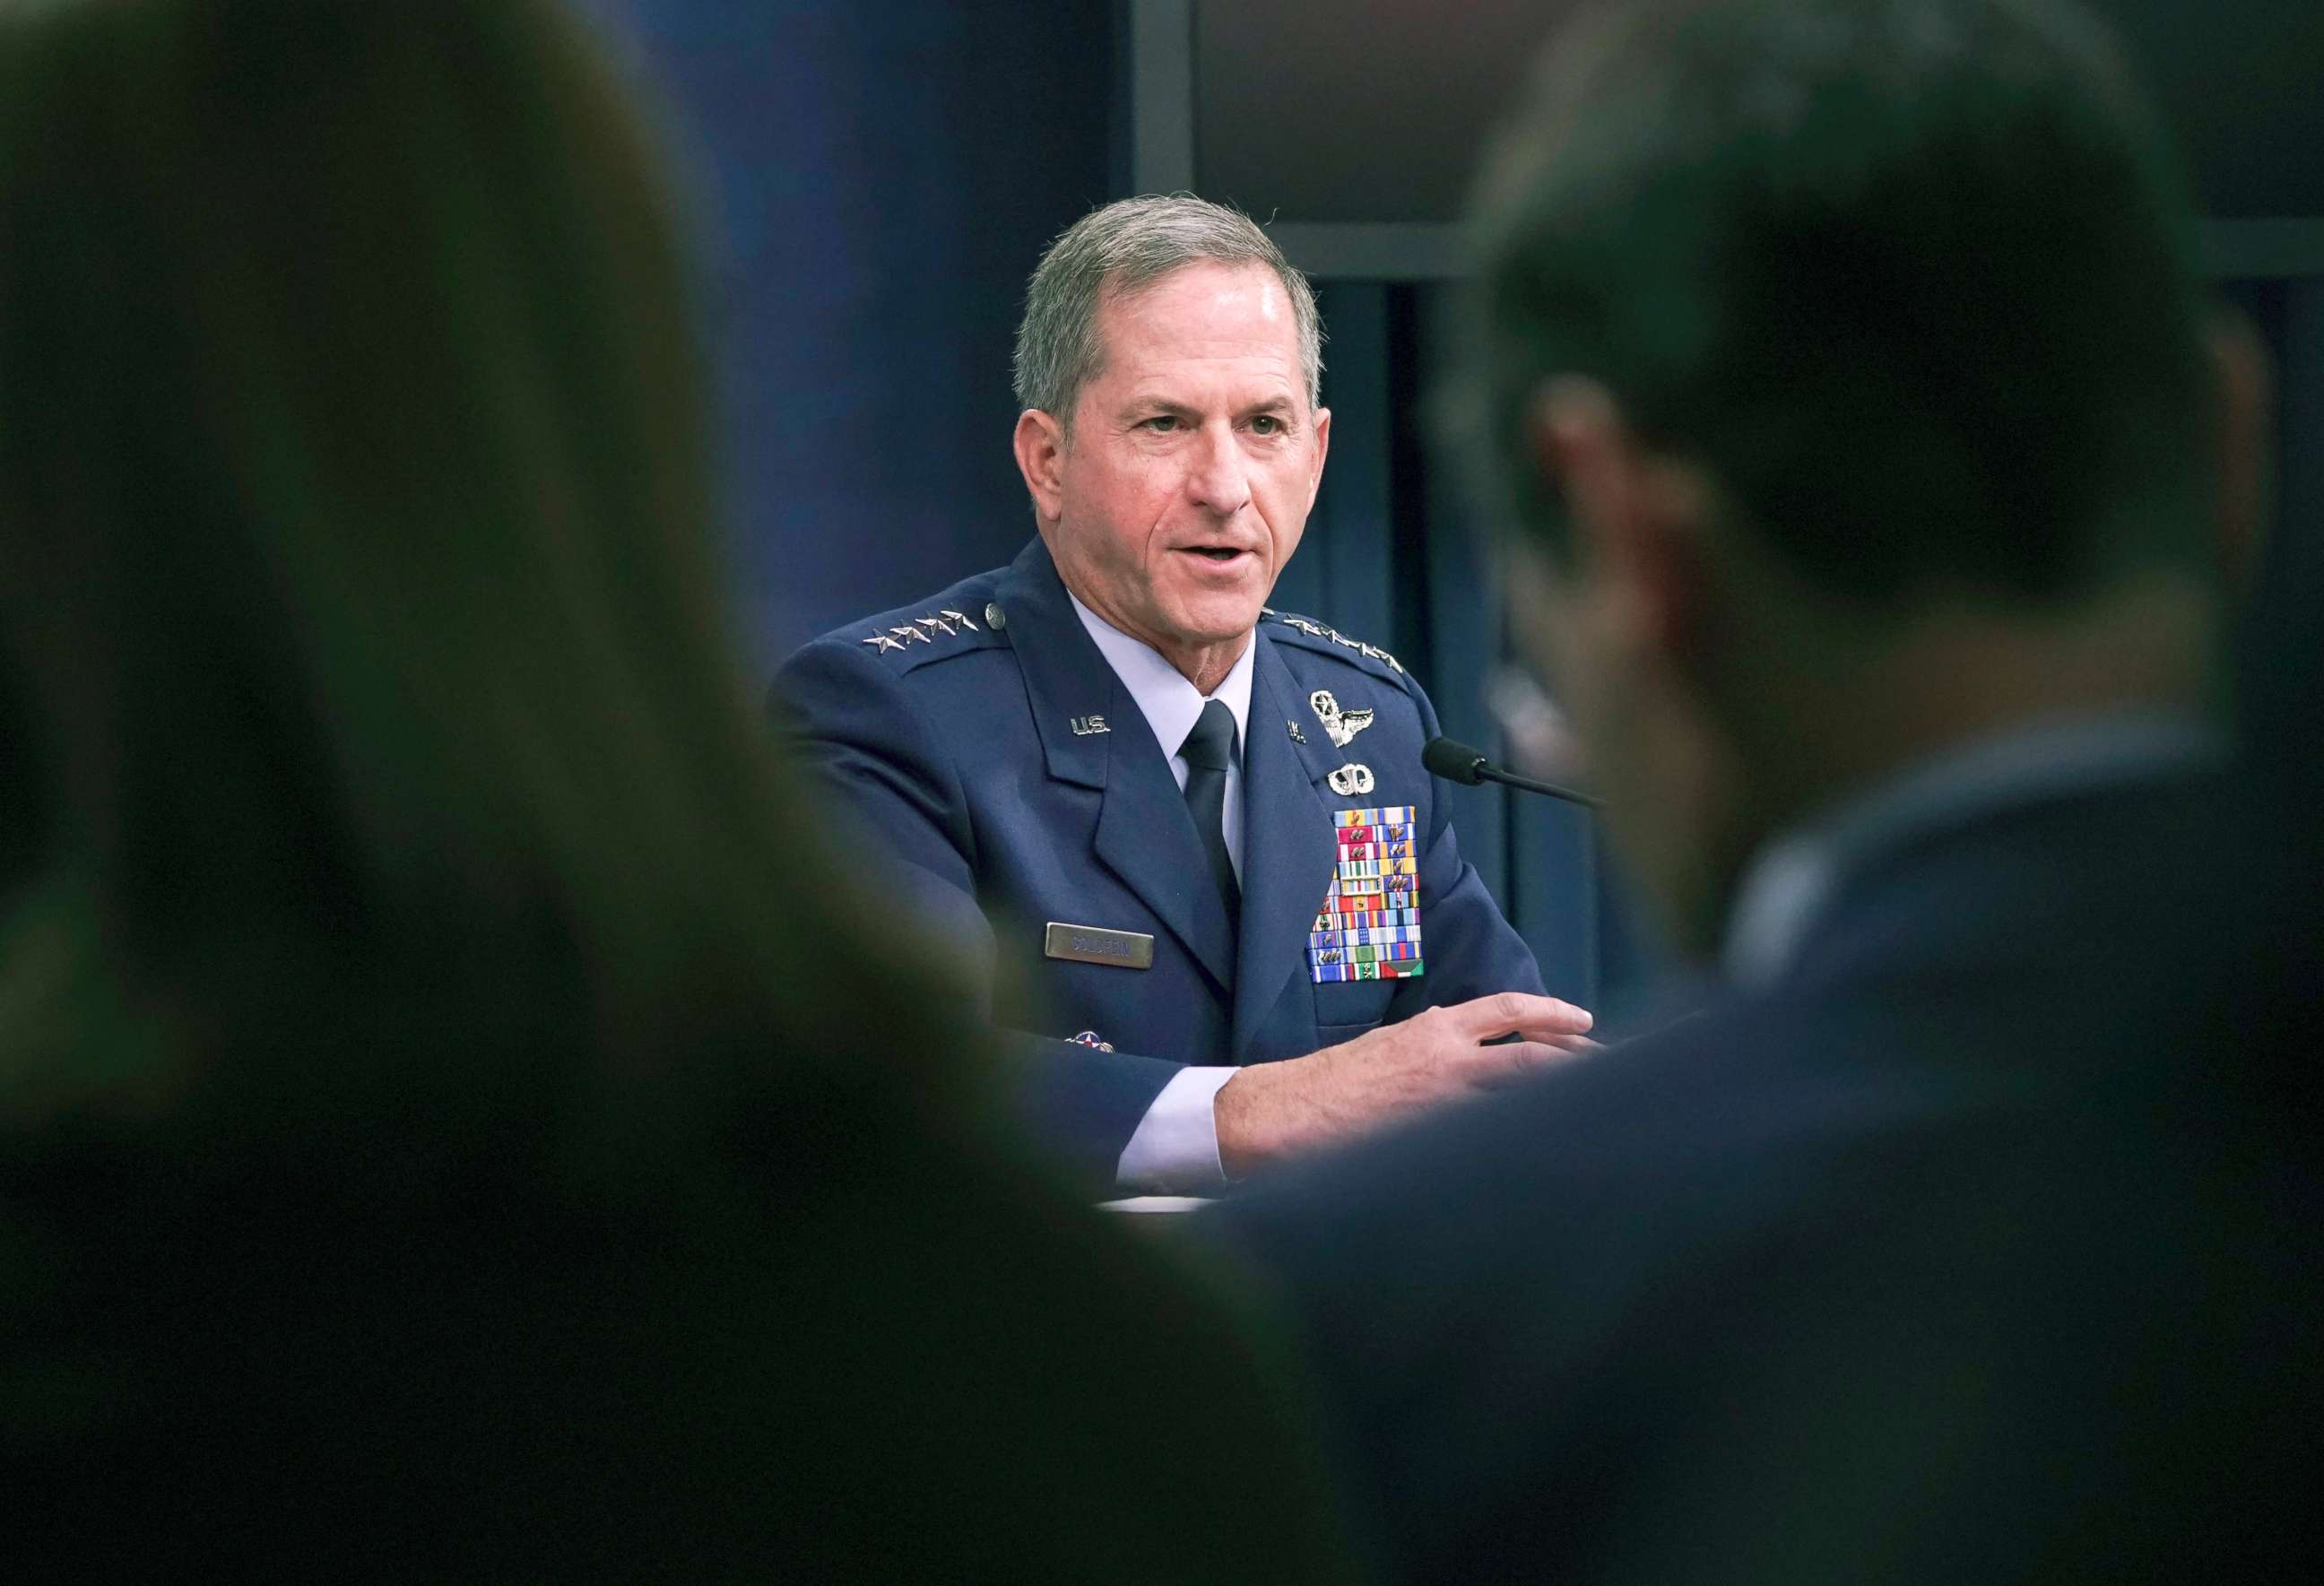 PHOTO: Gen. David L. Goldfein, Chief of Staff of the U.S. Air Force answers questions during a news briefing at the Pentagon, Nov. 9, 2017.